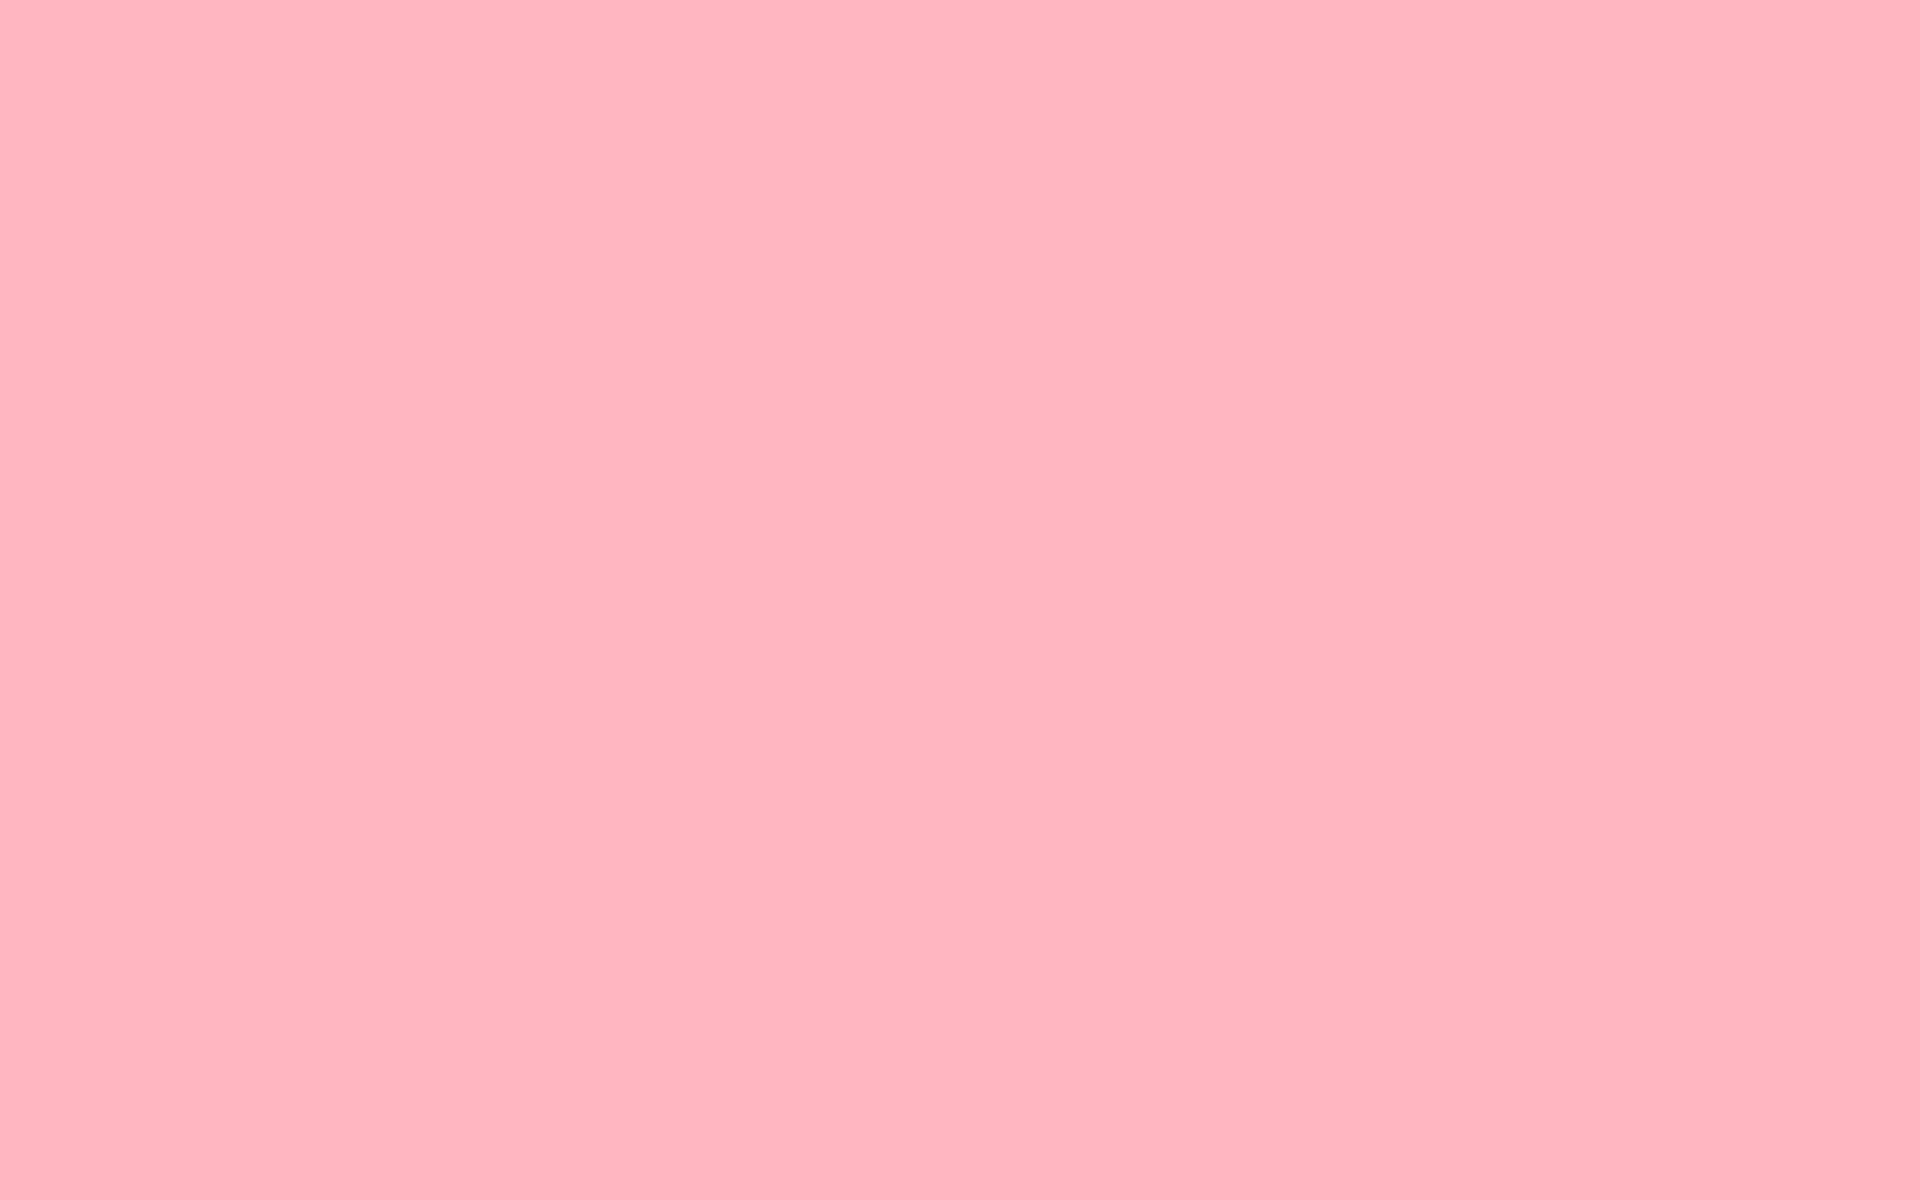  1920x1200 resolution Light Pink solid color background view and 1920x1200